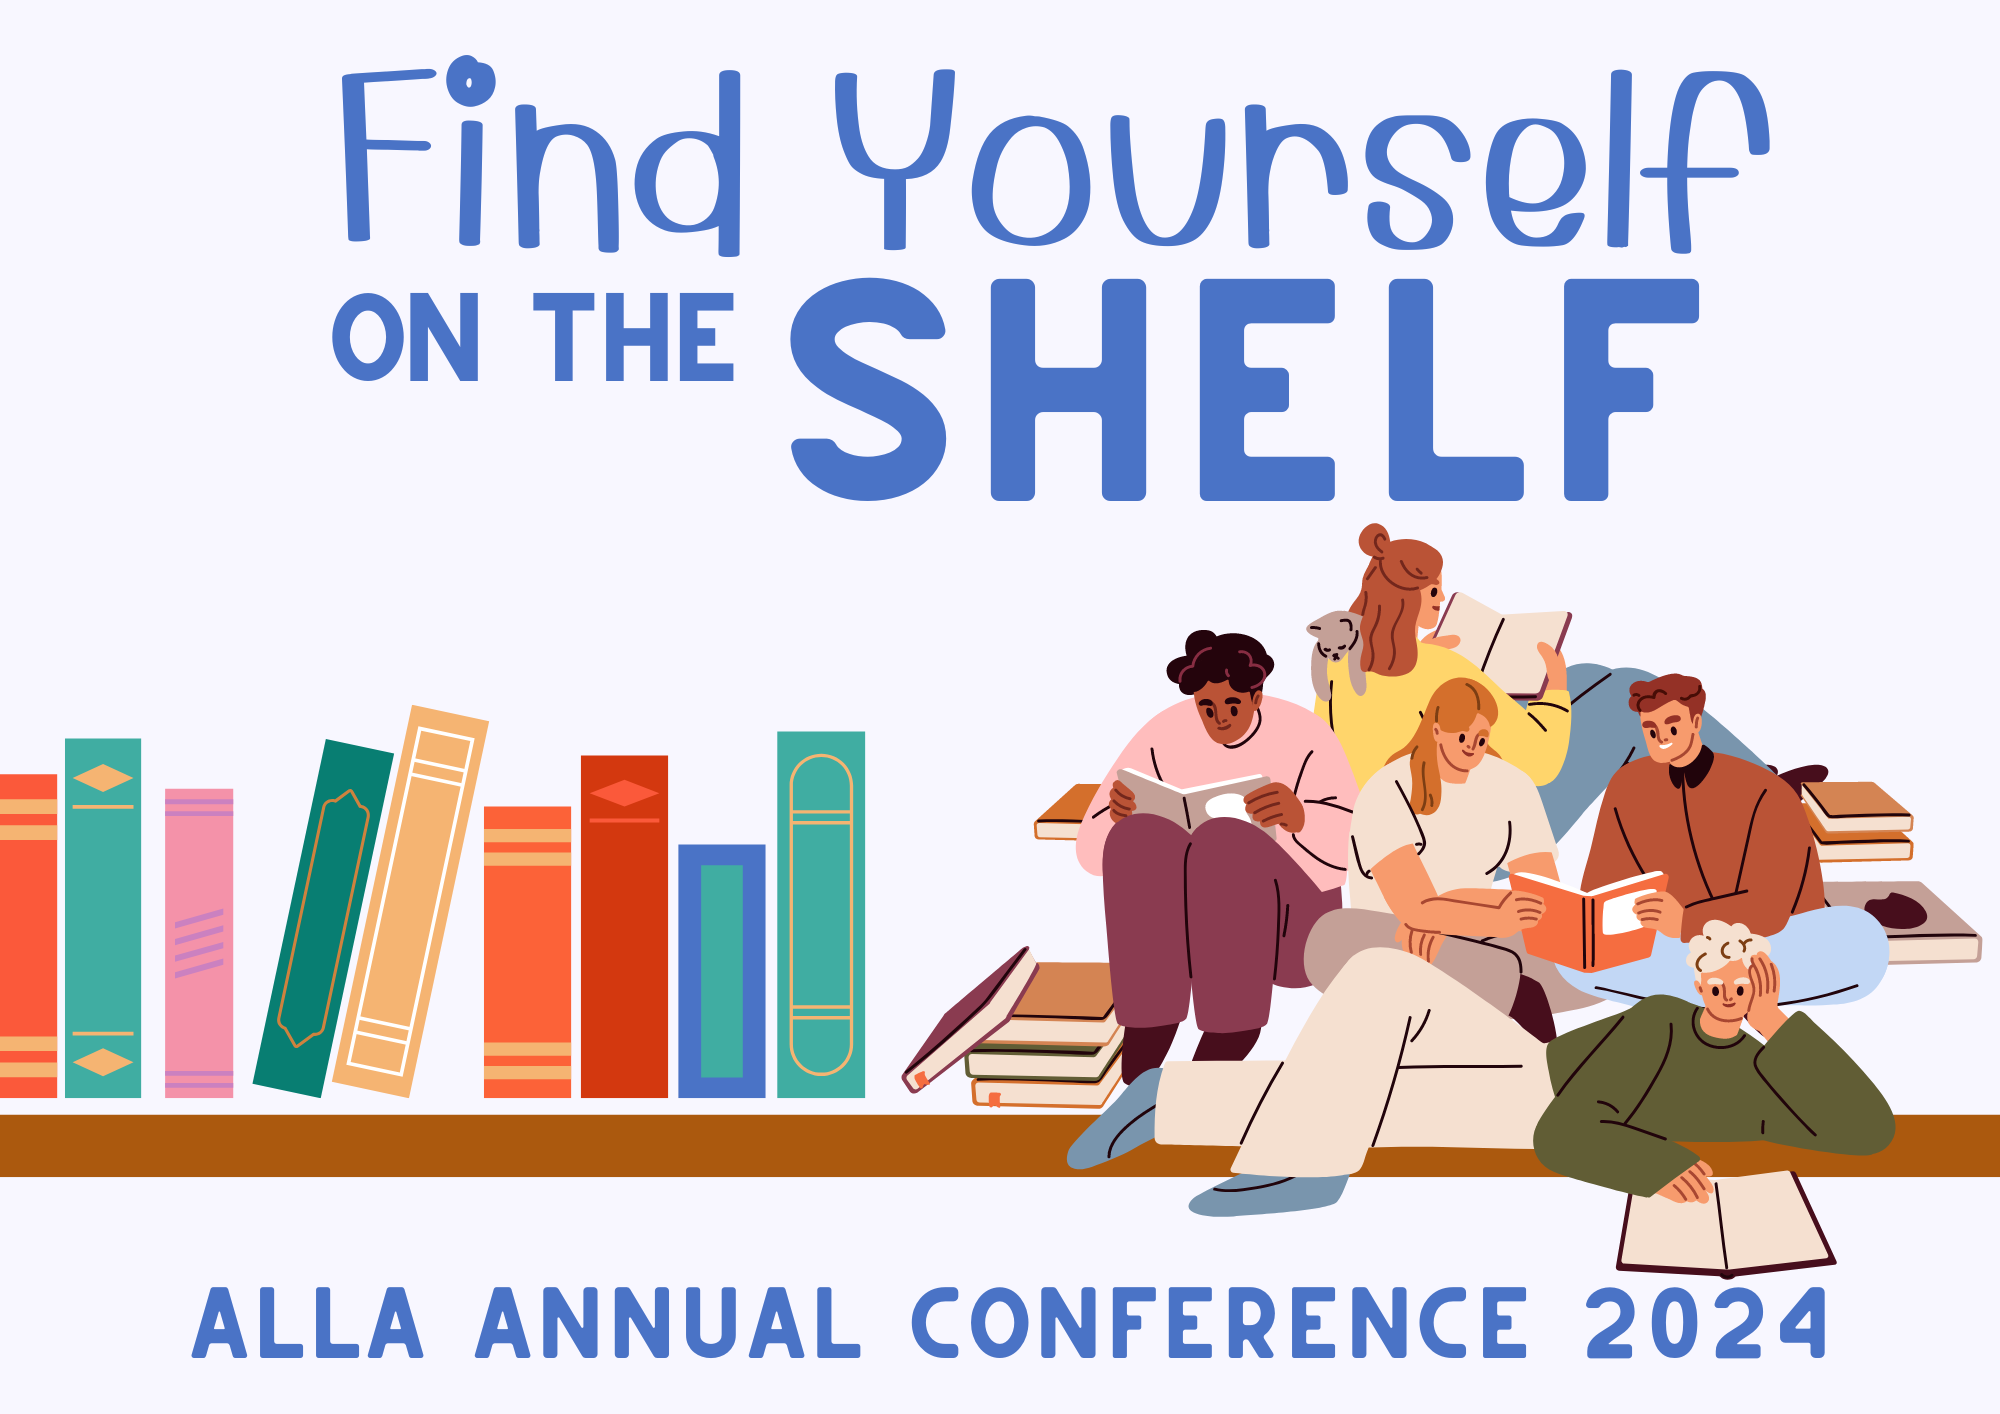 2024 ALLA Annual Convention Logo: Find Yourself on the Shelf